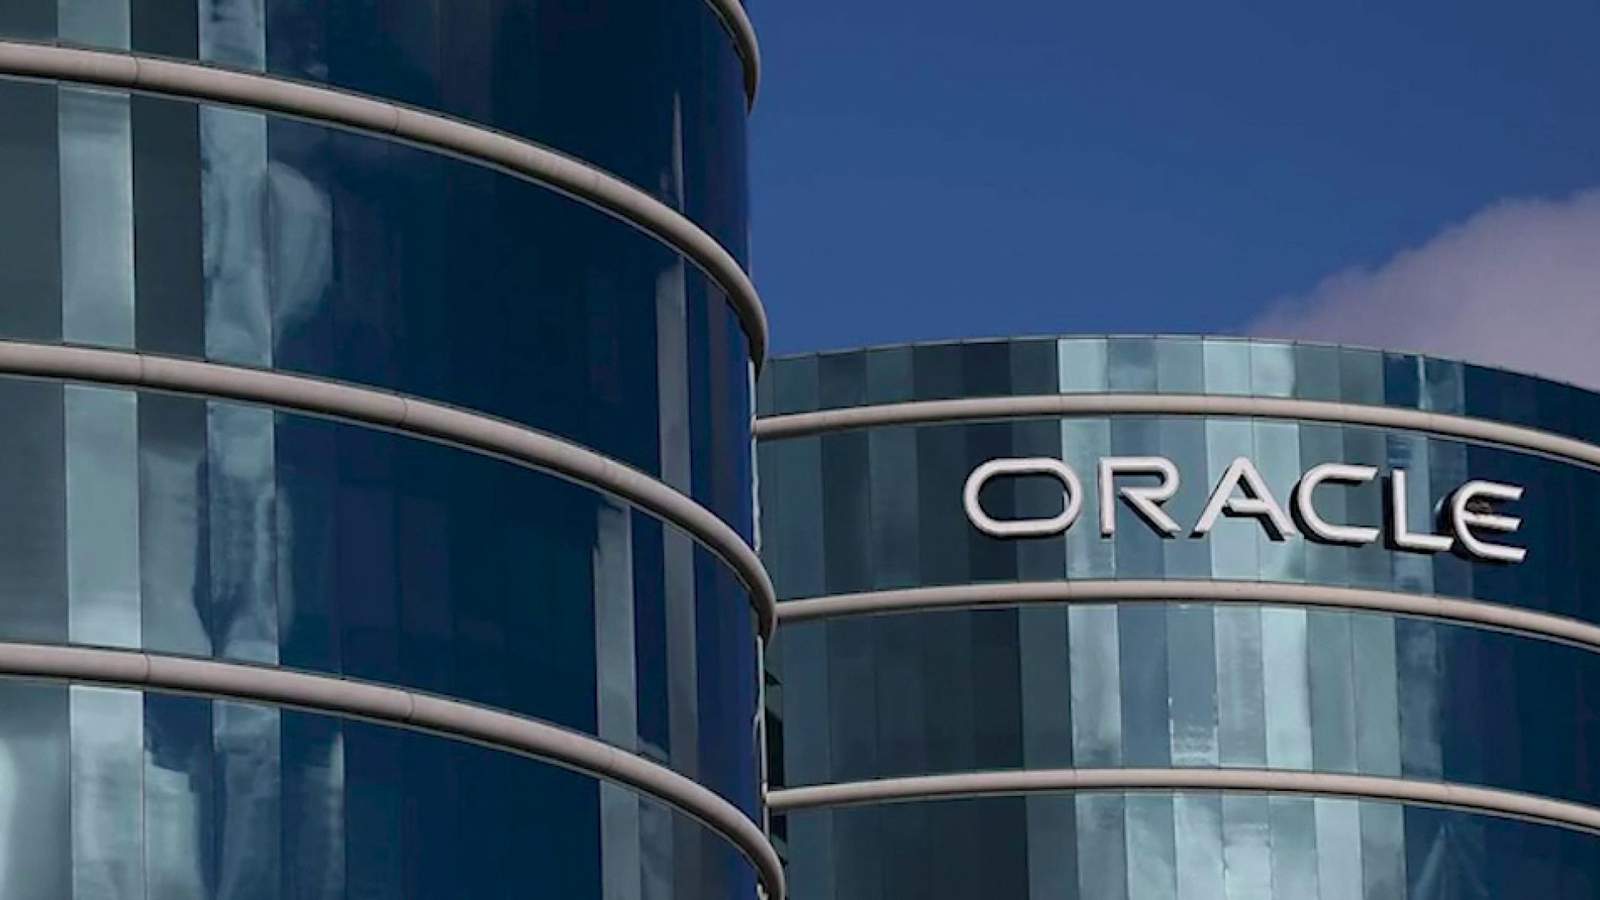 Oracle planning to relocate its headquarters to Texas